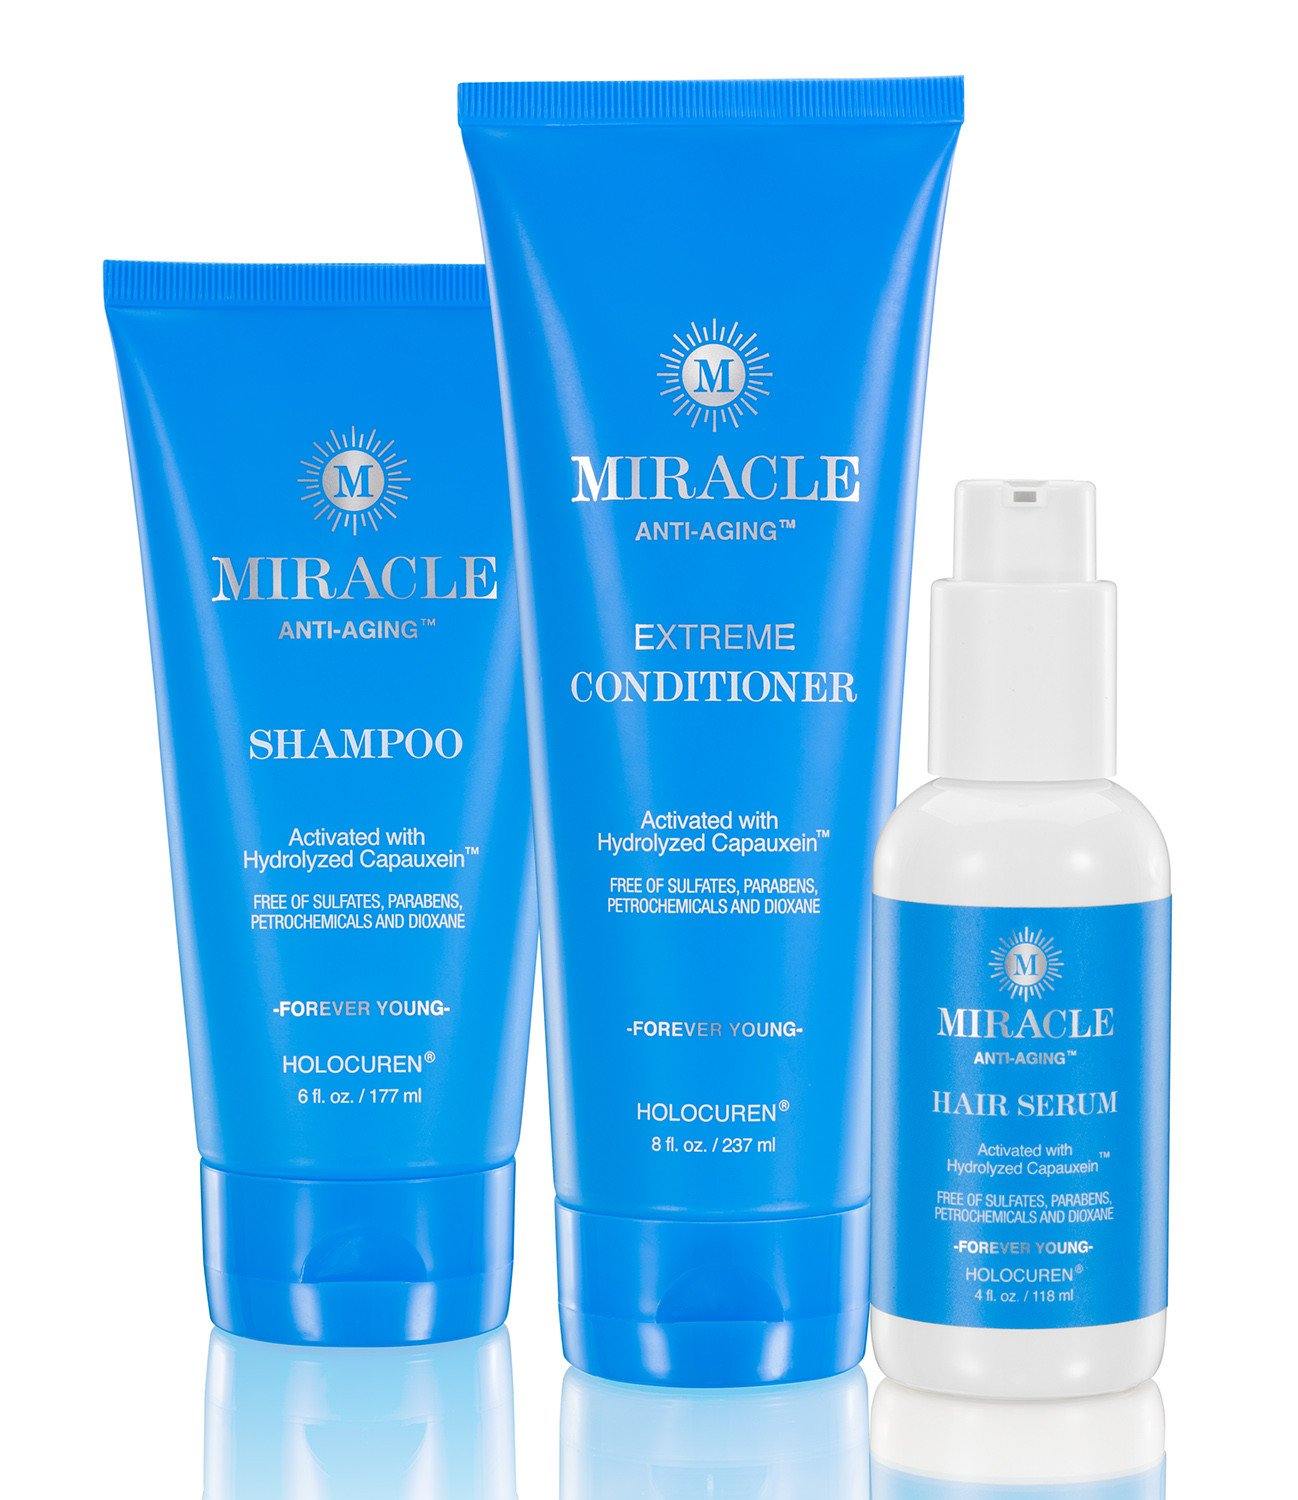 Miracle Anti-Aging Shampoo, Extreme Conditioner & Hair Serum (3-Pack) - HOLOCUREN - Official Website